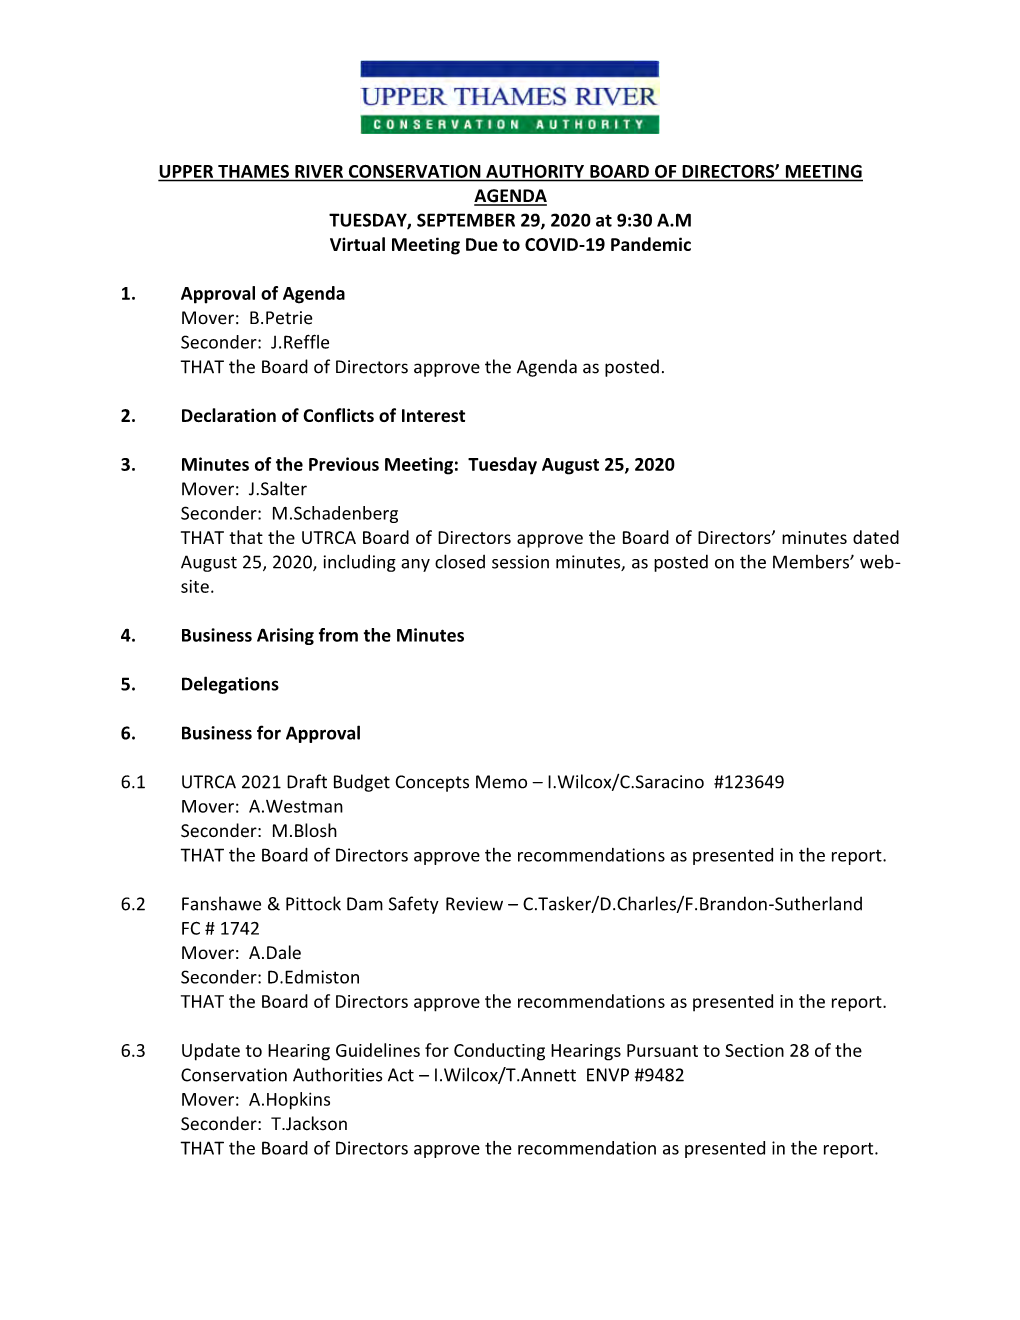 UPPER THAMES RIVER CONSERVATION AUTHORITY BOARD of DIRECTORS' MEETING AGENDA TUESDAY, SEPTEMBER 29, 2020 at 9:30 A.M Virtual M